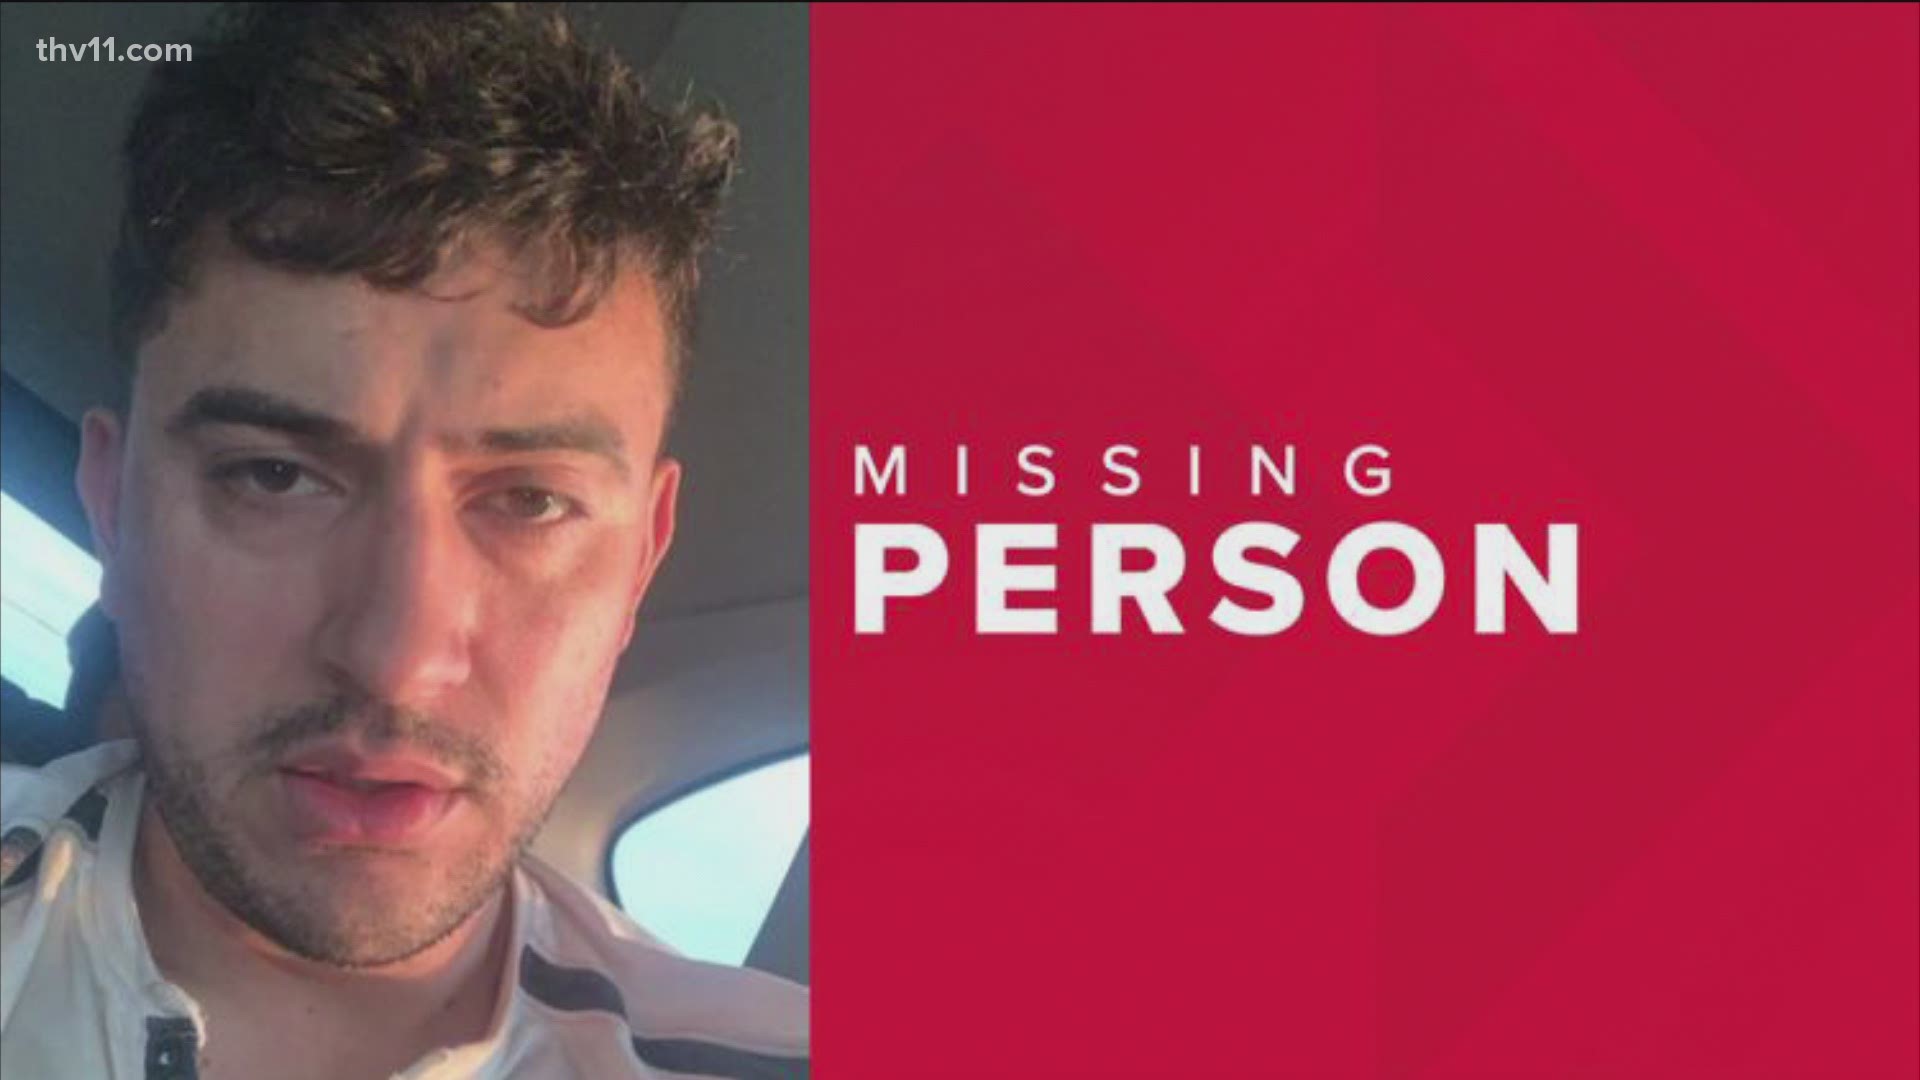 An Arkansas resident who went to Mexico to visit his girlfriend and has not been seen since March 29.